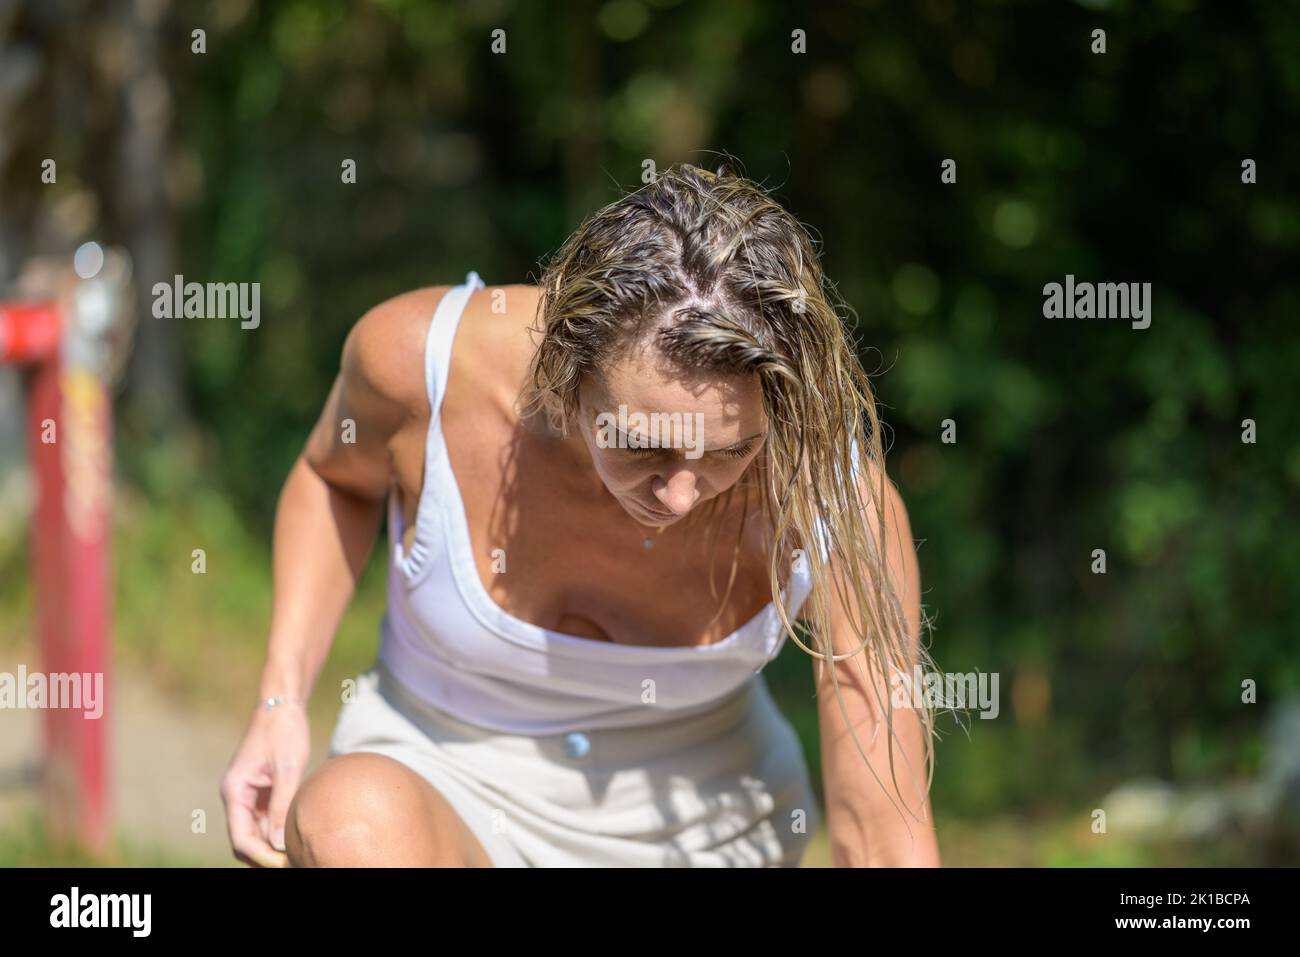 Blonde woman with wet hair leans forward and puts on her shoes Stock Photo